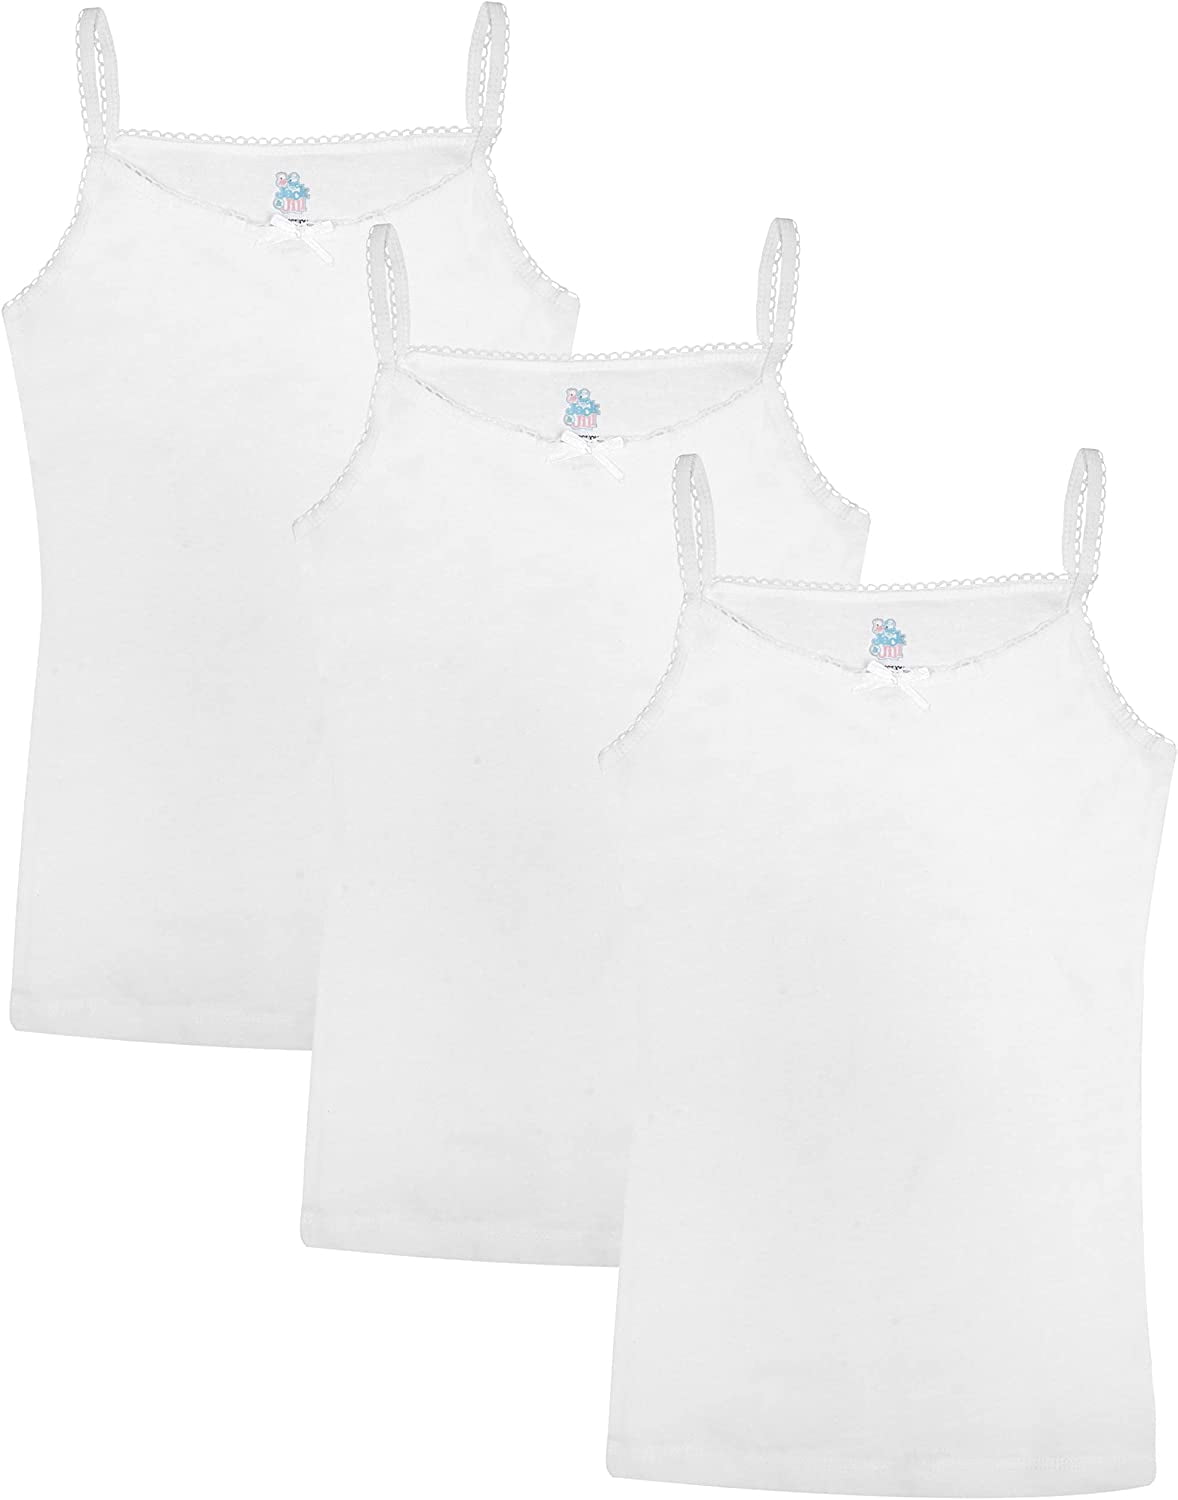 Buyless Fashion Girls Tagless Cami Scoop Neck Undershirts Cotton Tank Tops  With Trim and Strap (4 Pack) 